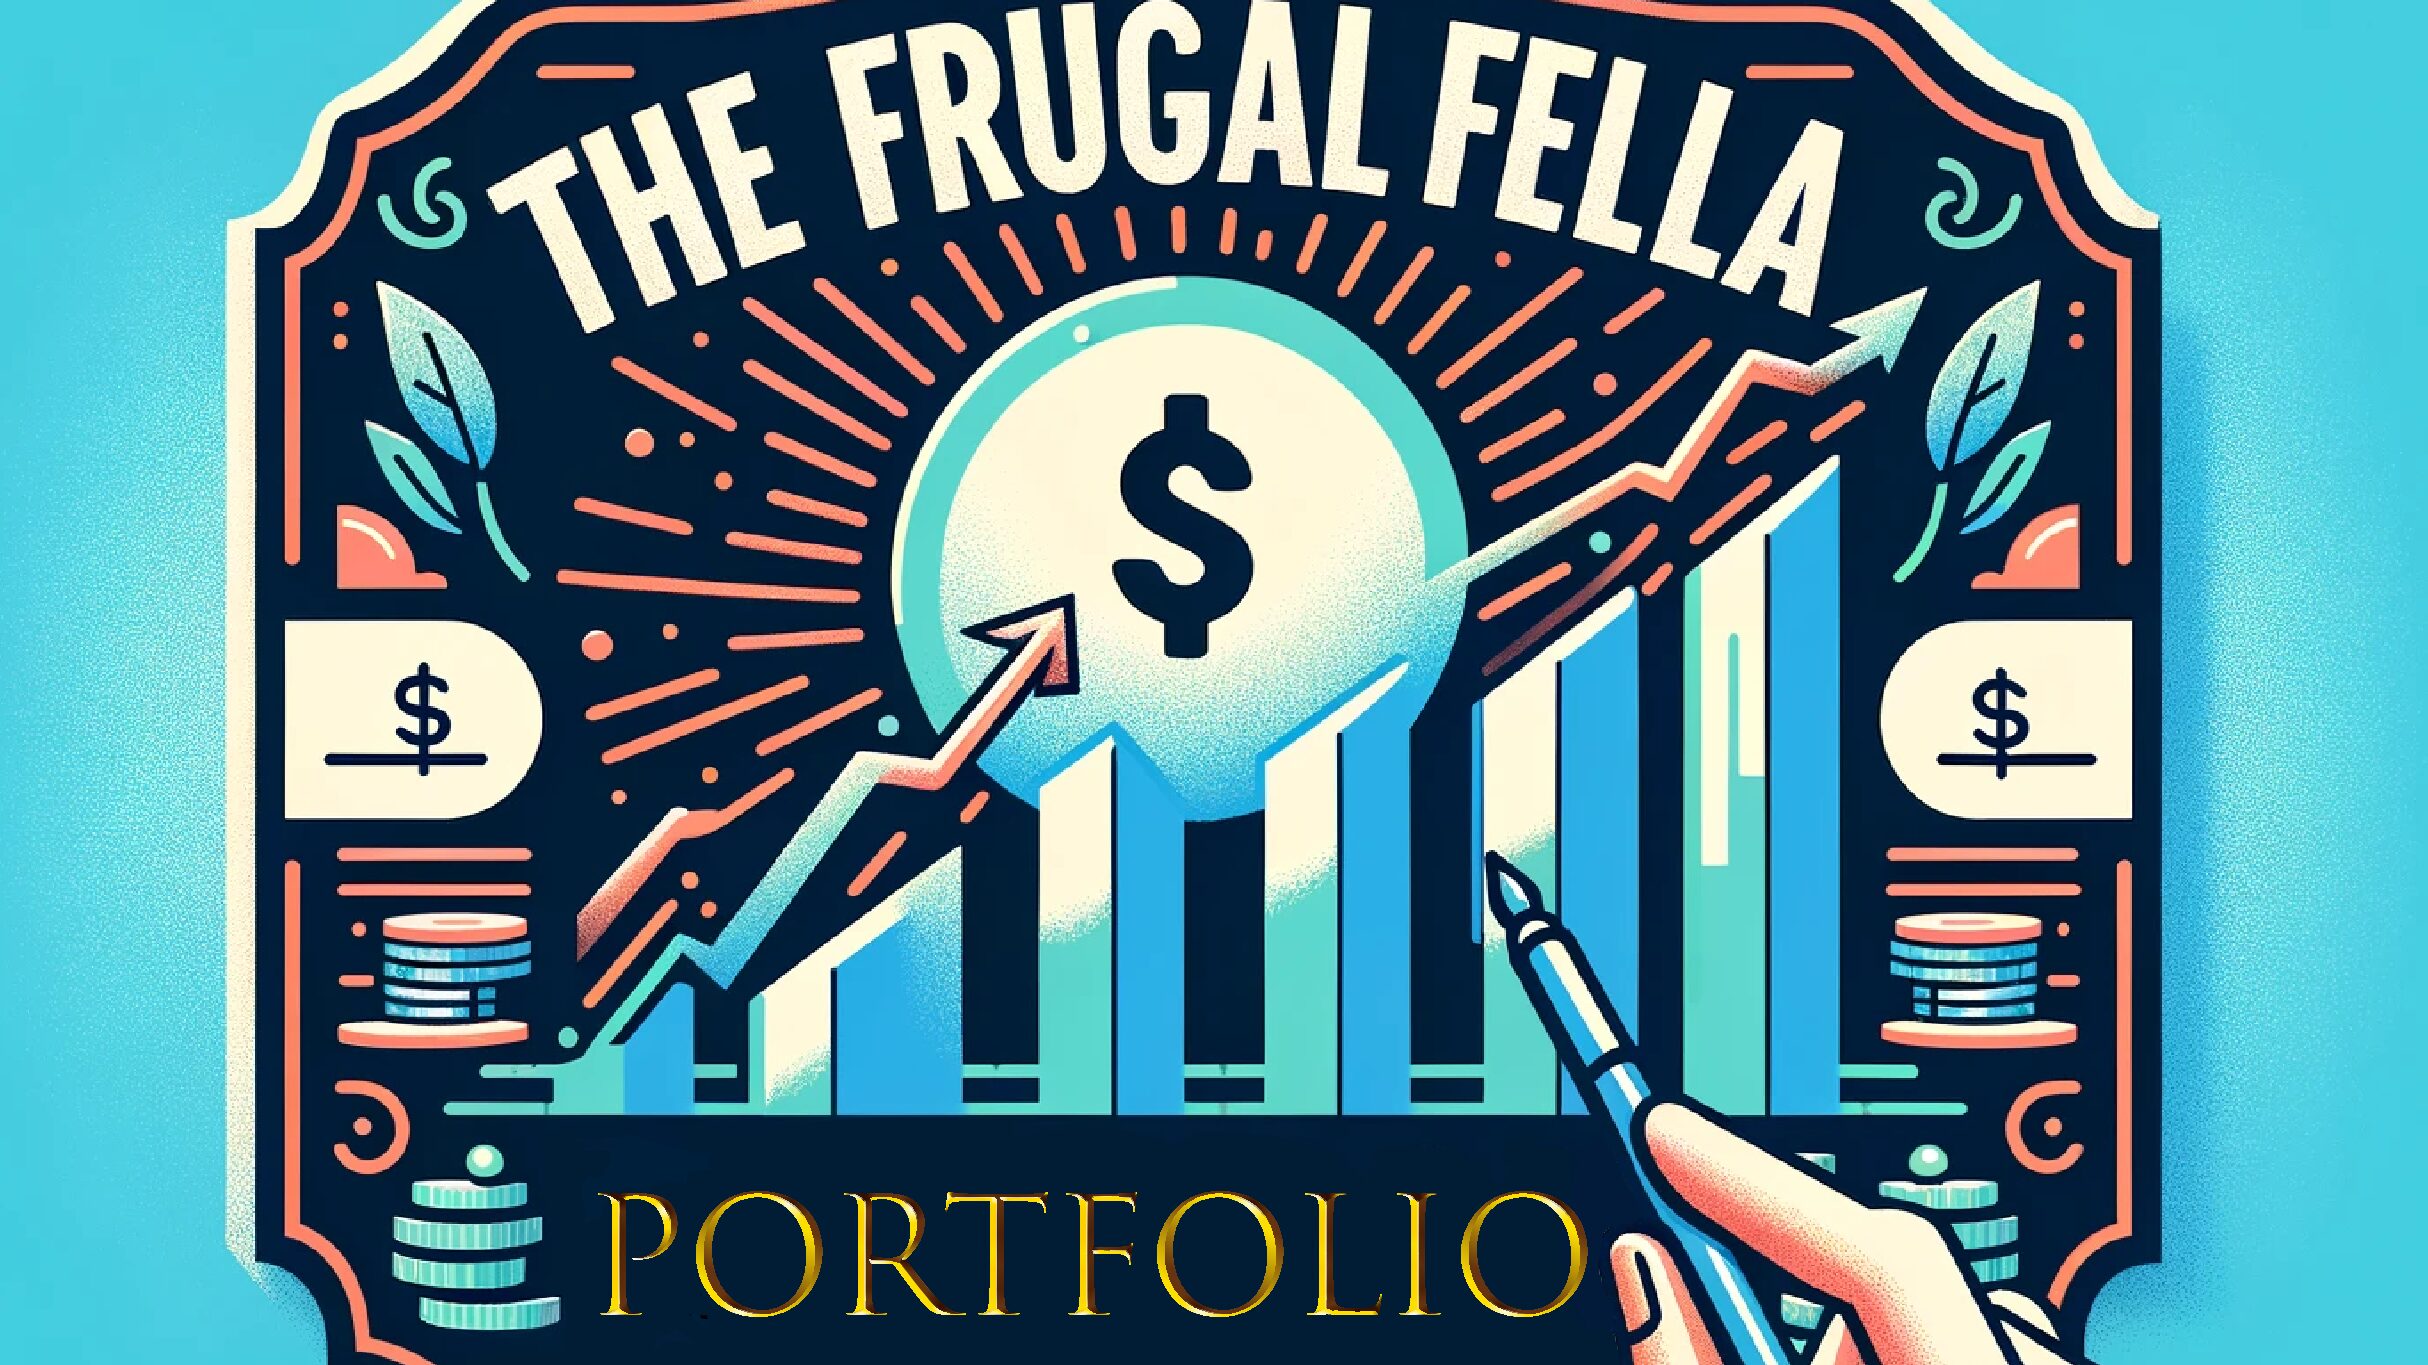 Introducing The Road To $1 Million Portfolio! Your Blueprint to Financial Freedom